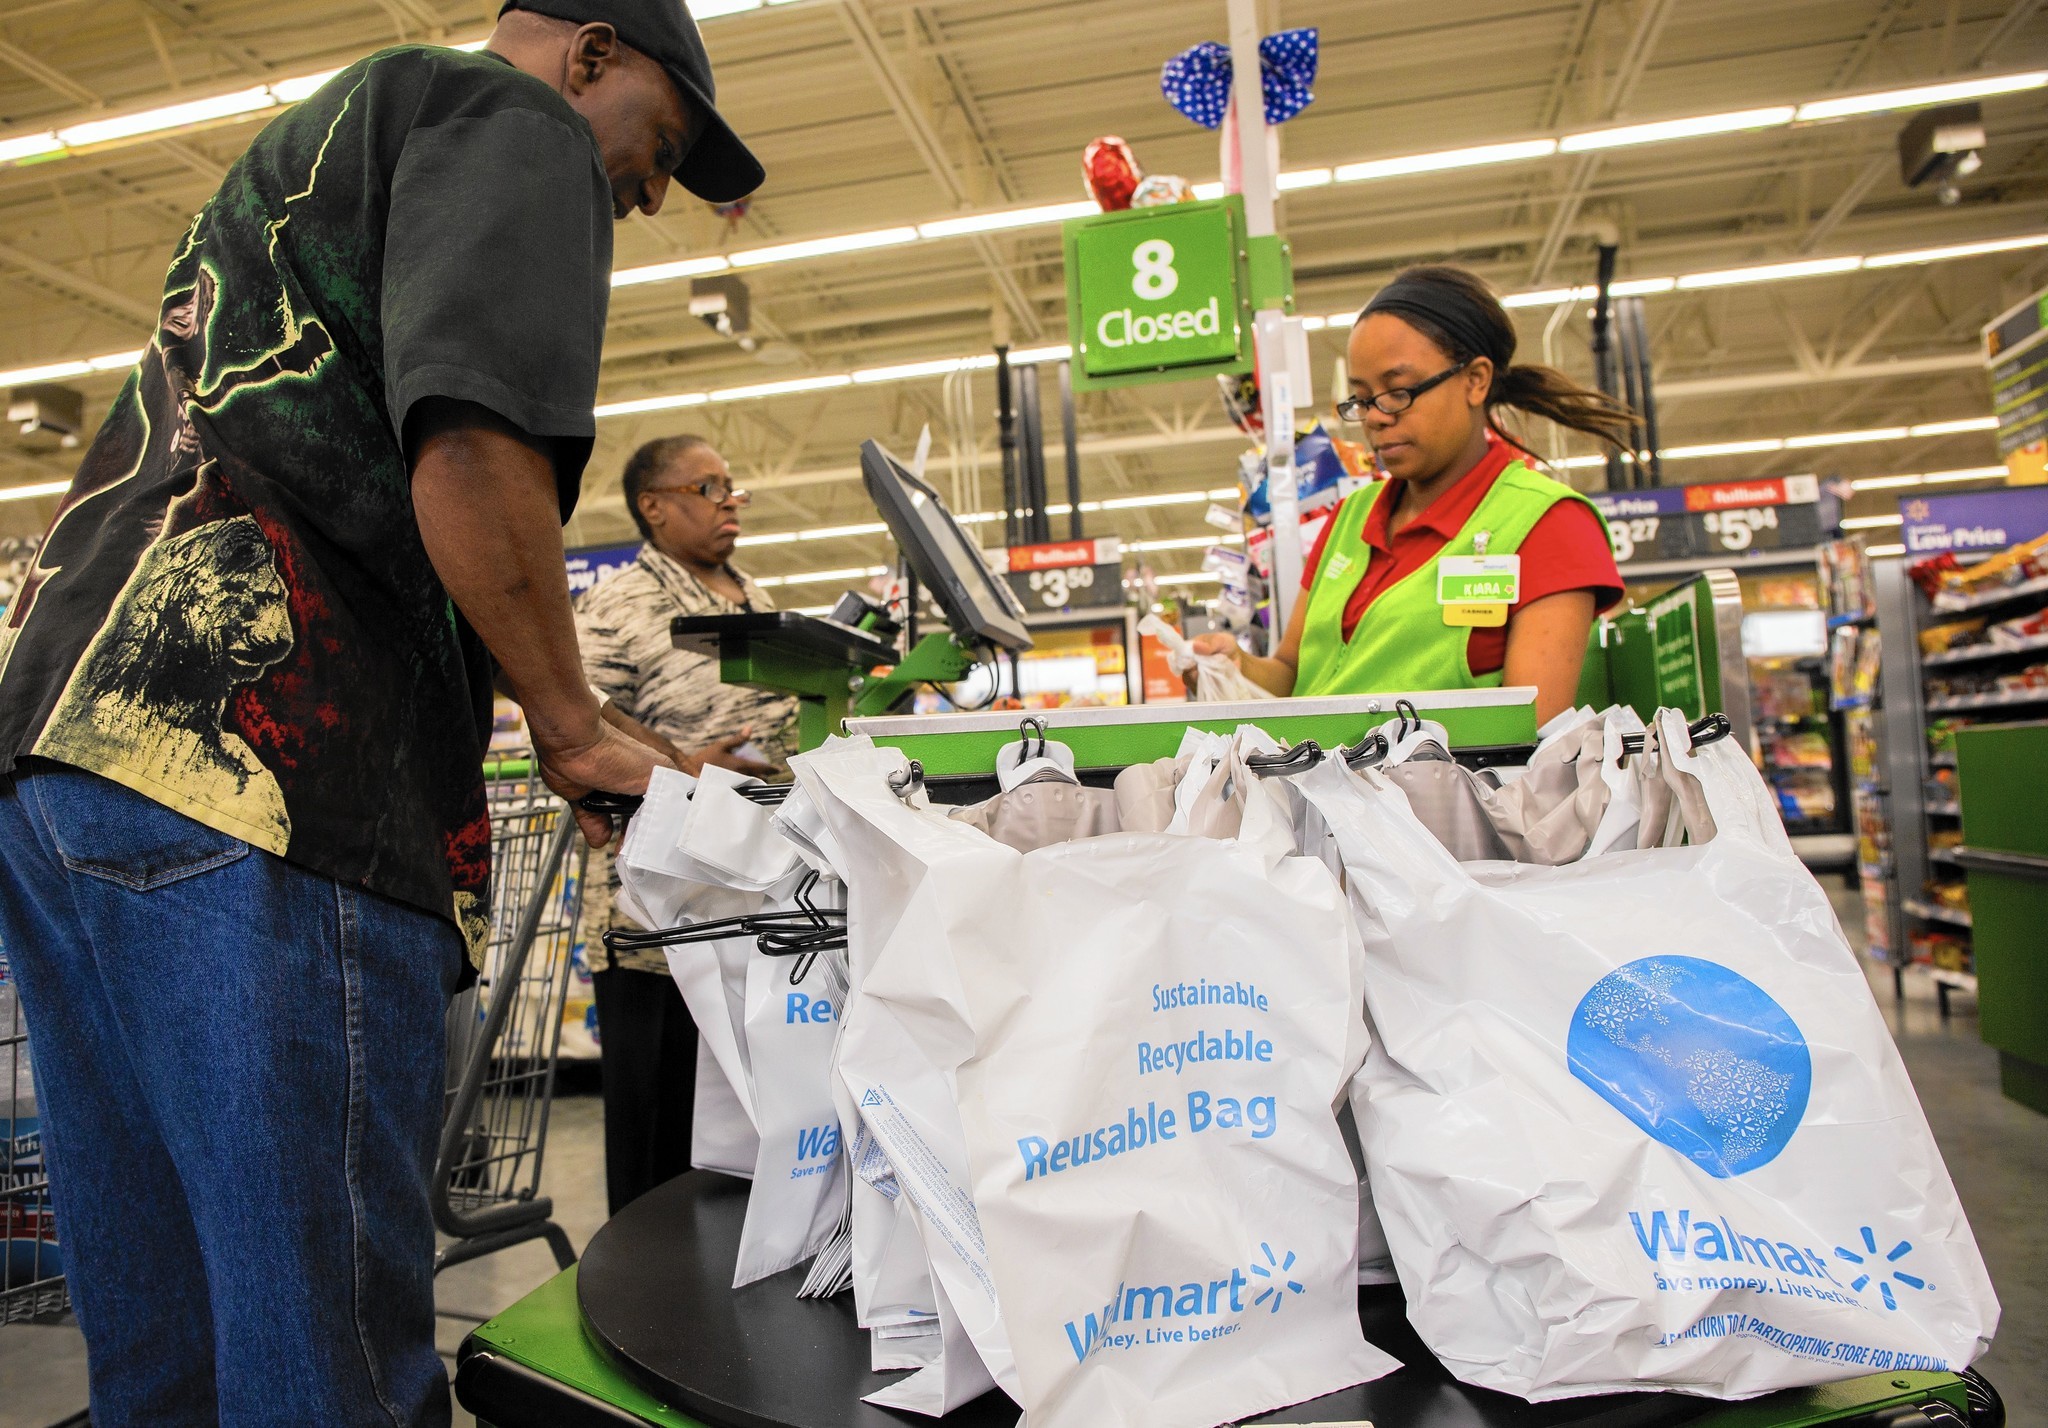 The result of Chicago plastic bag ban: Shopping bags to be sturdier - Chicago Tribune